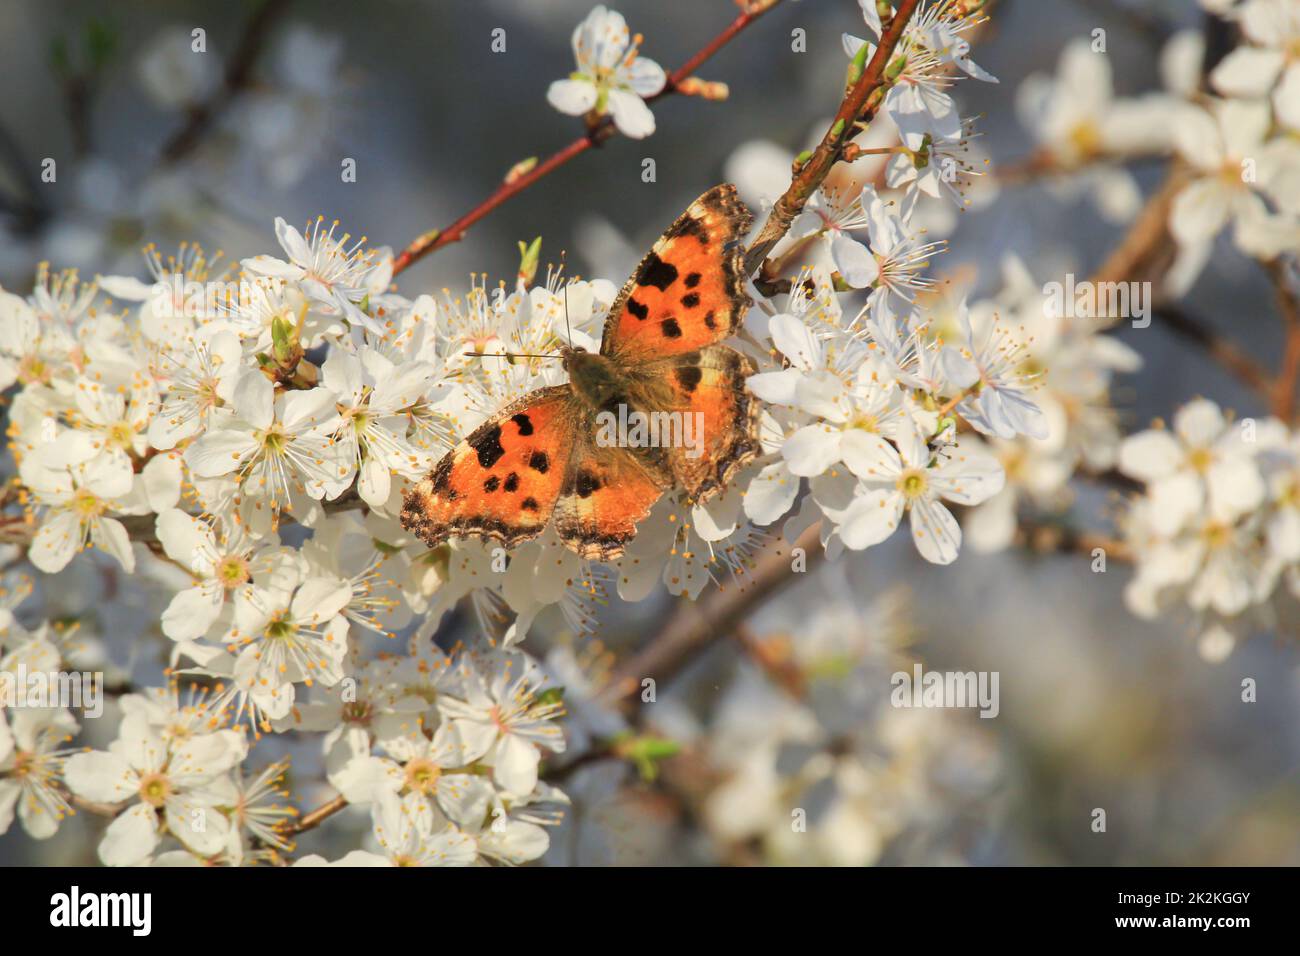 The little fox butterfly on the flowers of a fruit tree. Stock Photo